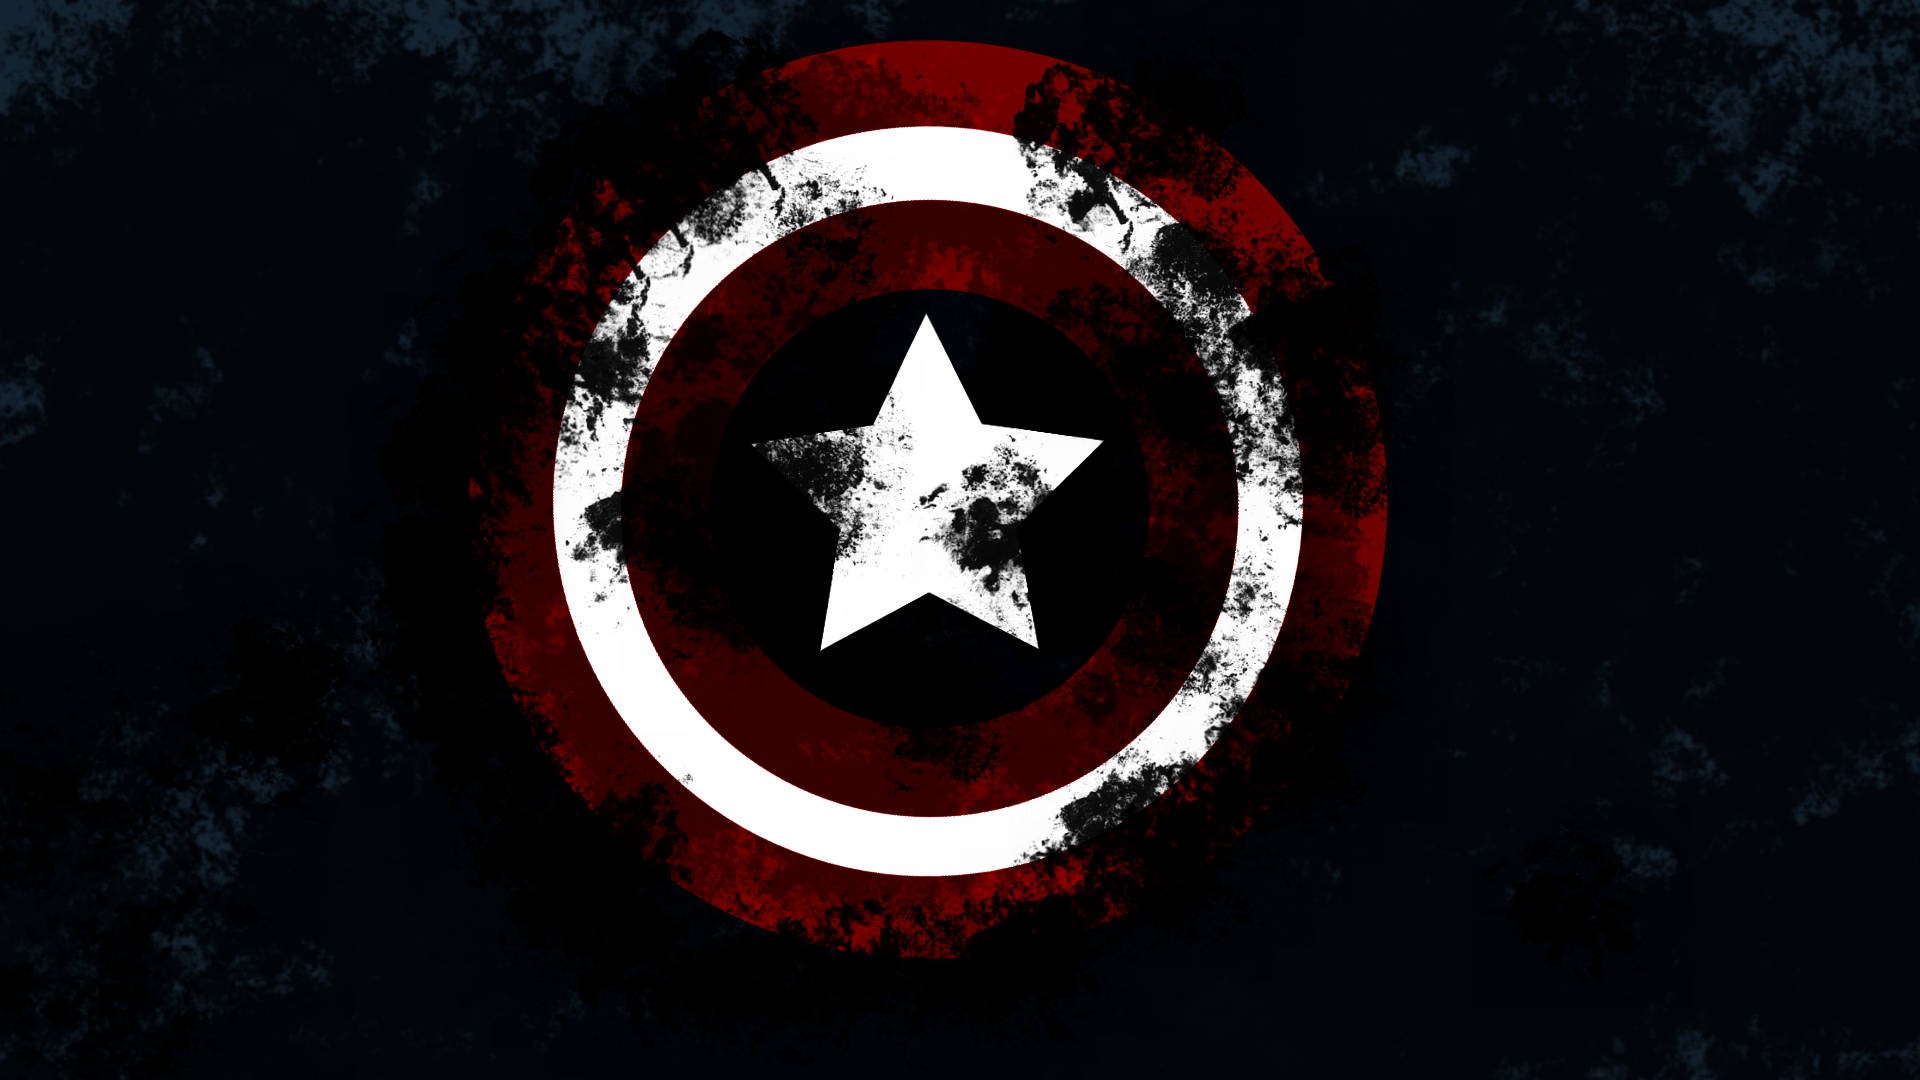 Captain America 1920X1080 Wallpaper and Background Image